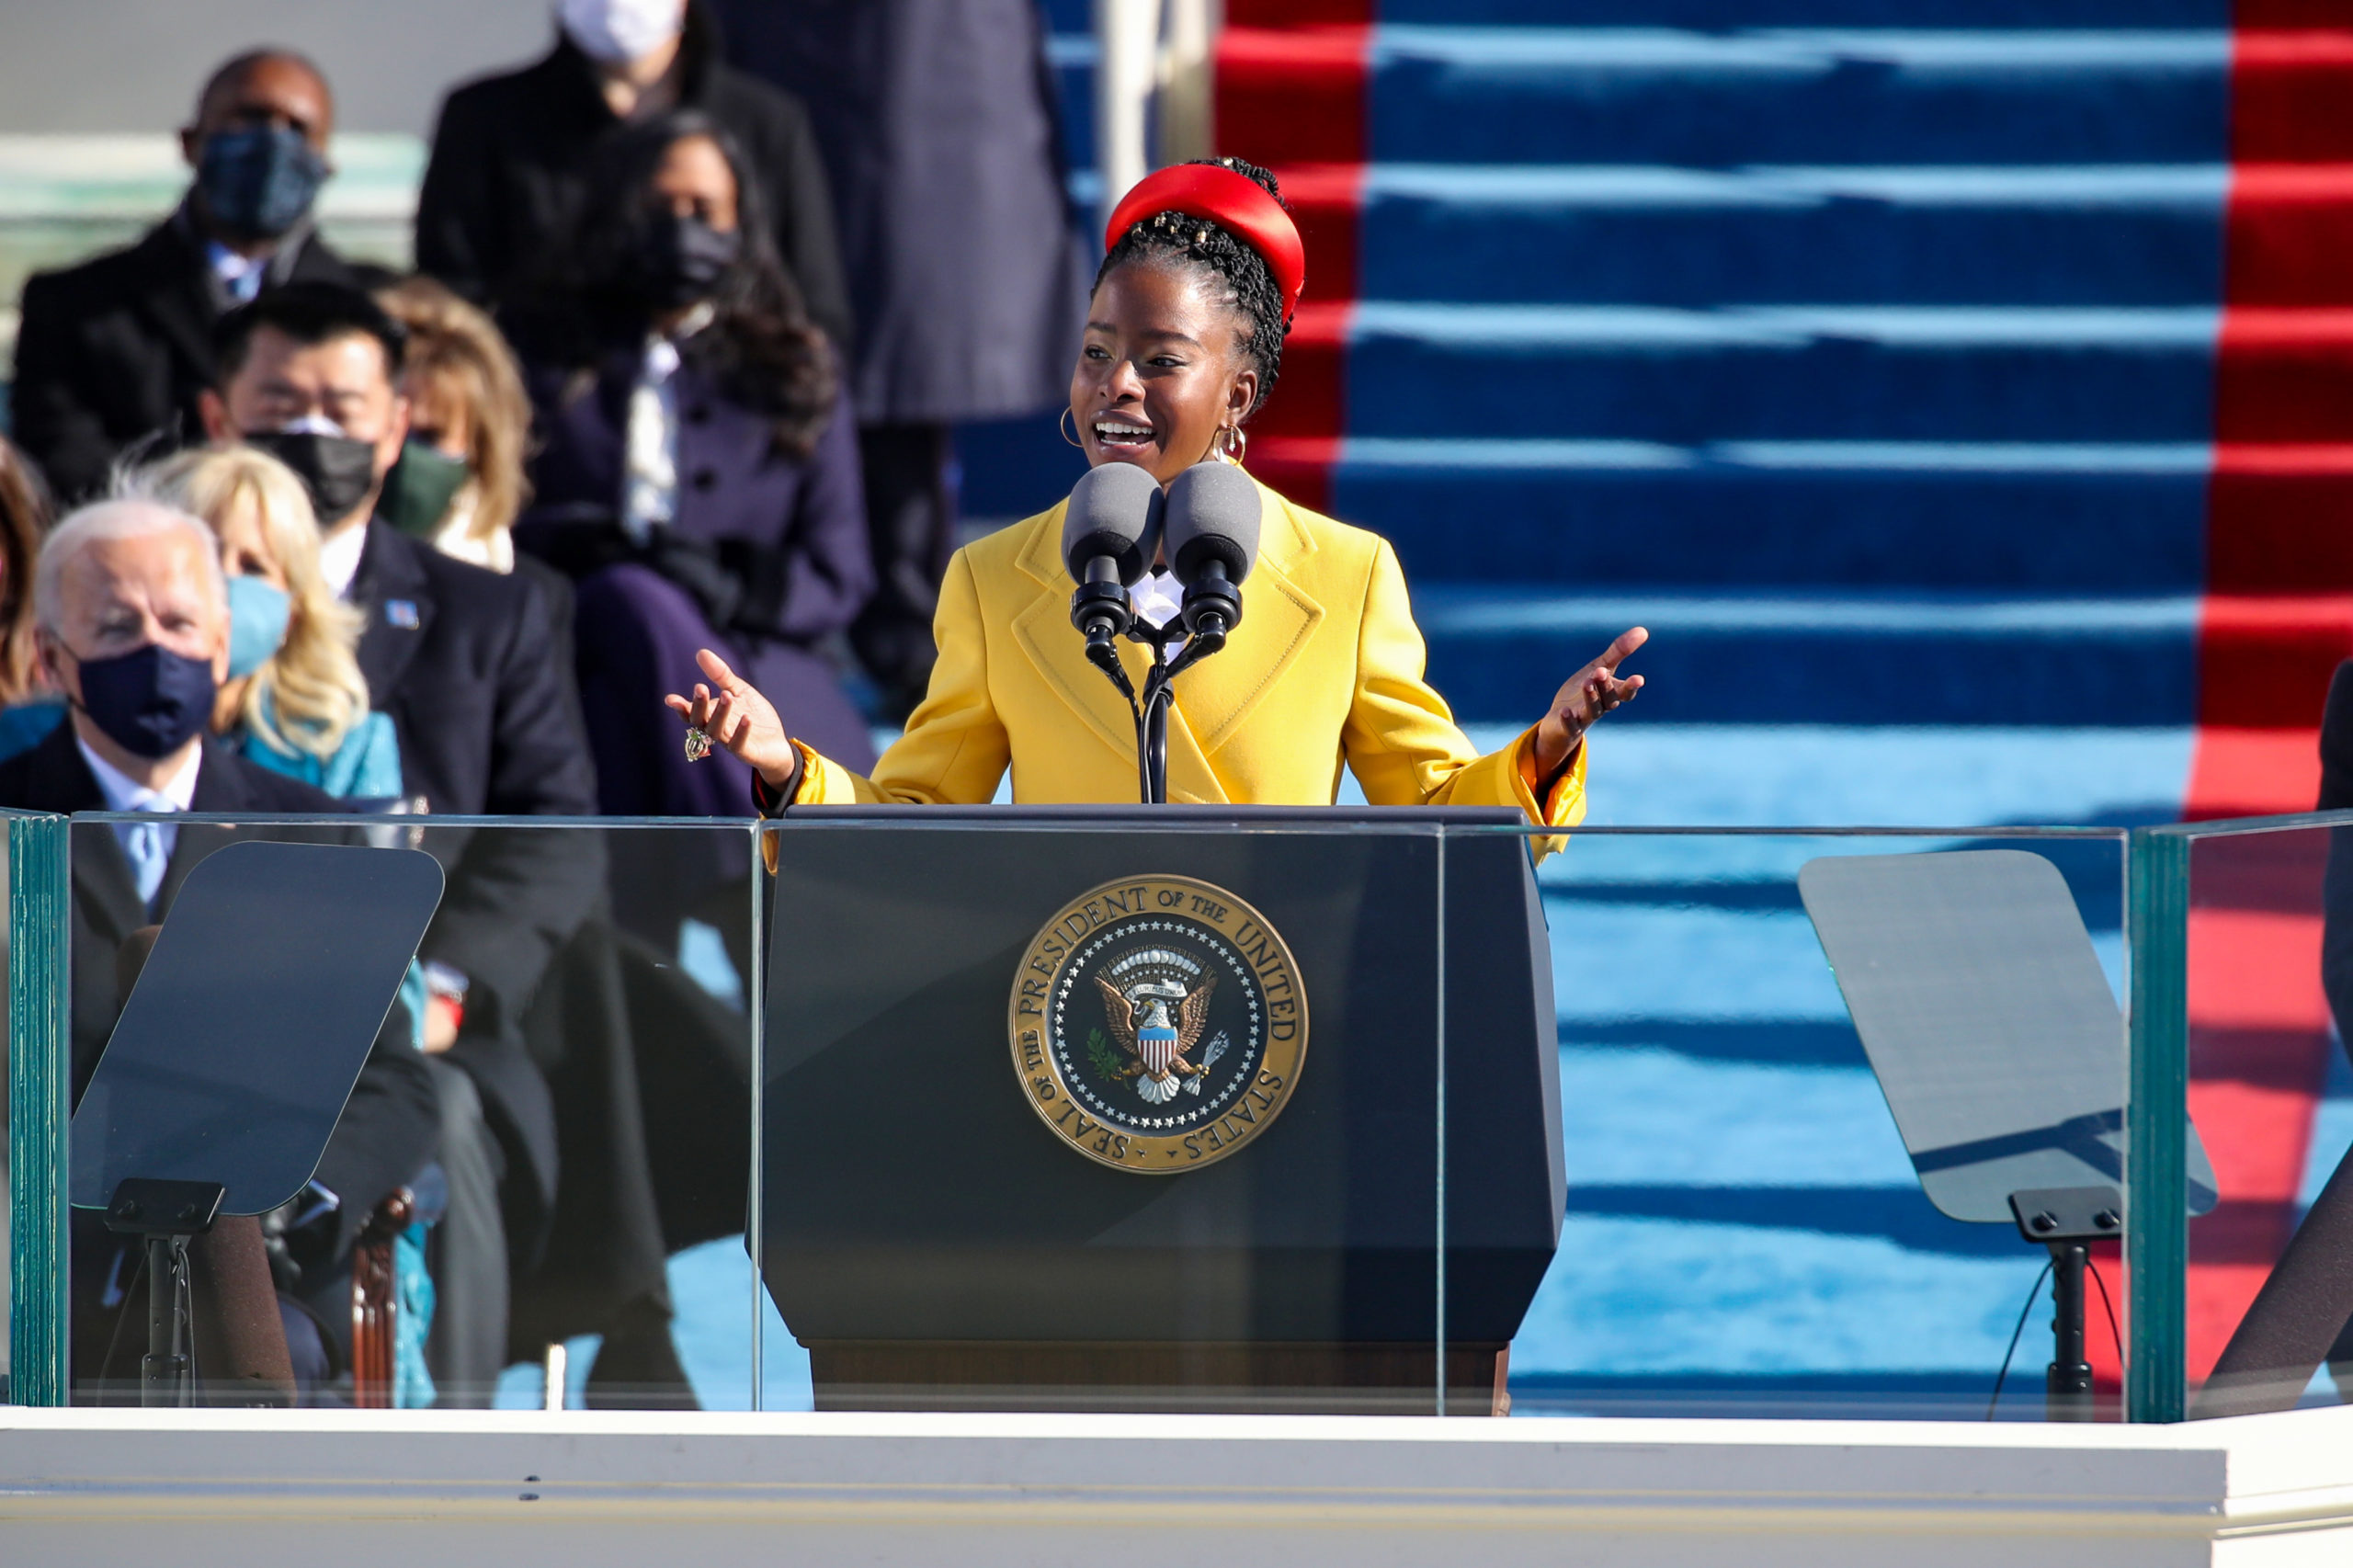 Amanda Gorman recites a poem during the inauguration of Joe Biden as the 46th President of the United States on the West Front of the U.S. Capitol in Washington, D.C., Jan. 20, 2021.